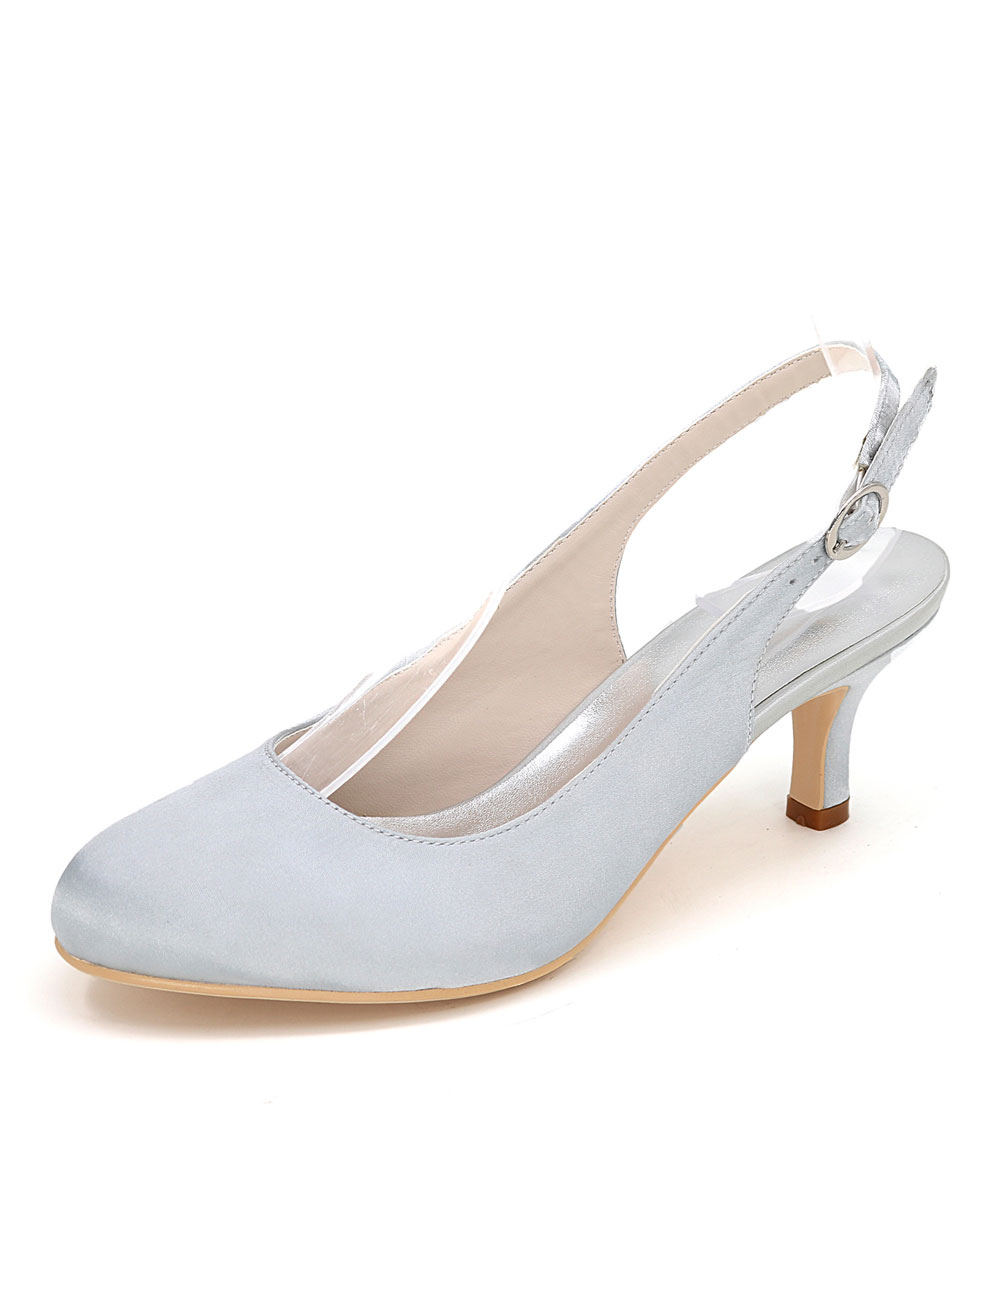 silver satin shoes for wedding